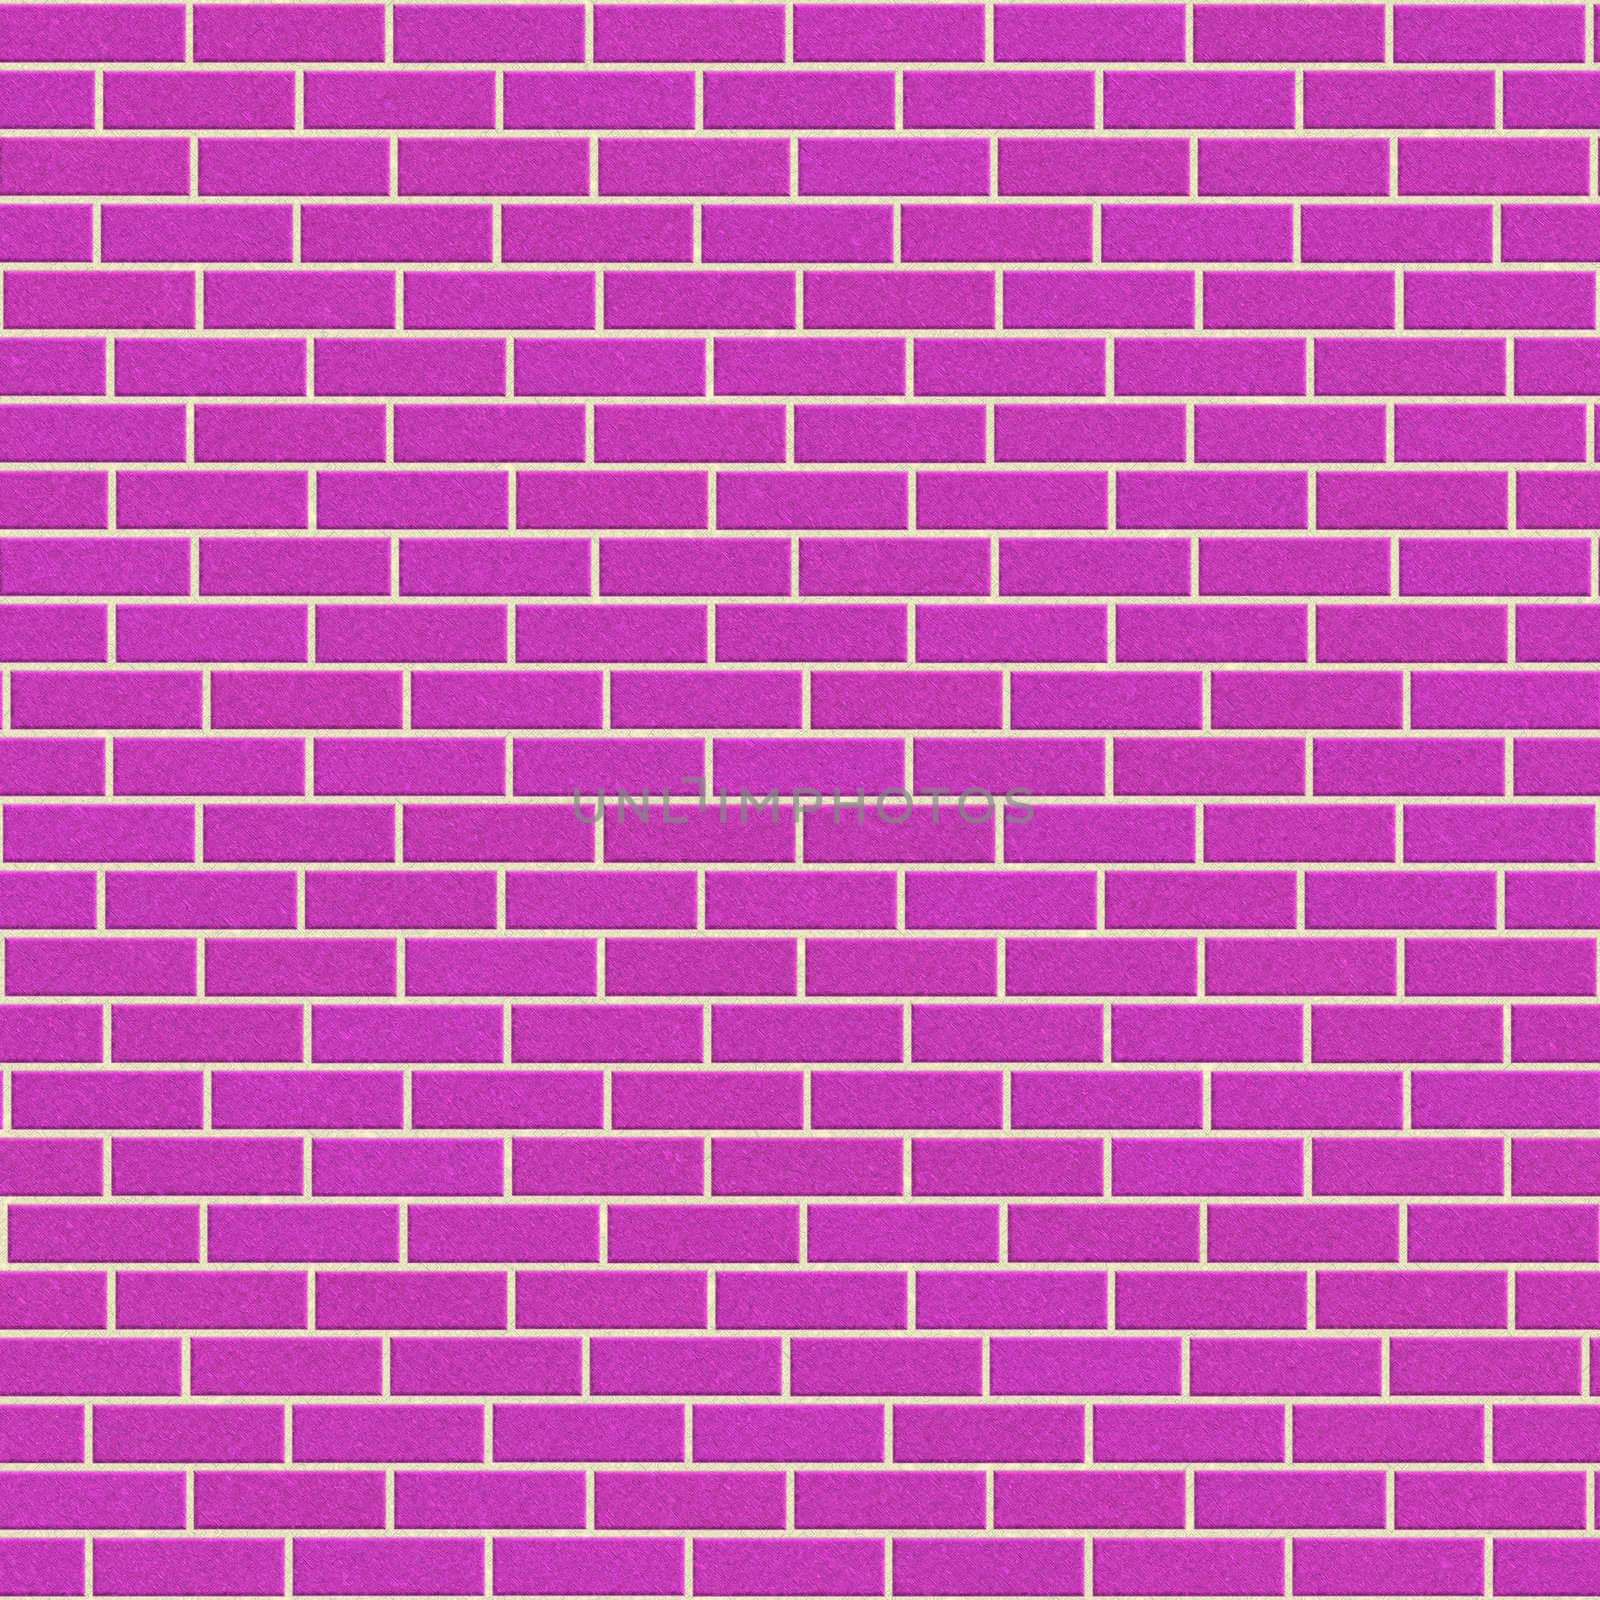 pink brick wall, will tile seamlessly as a pattern